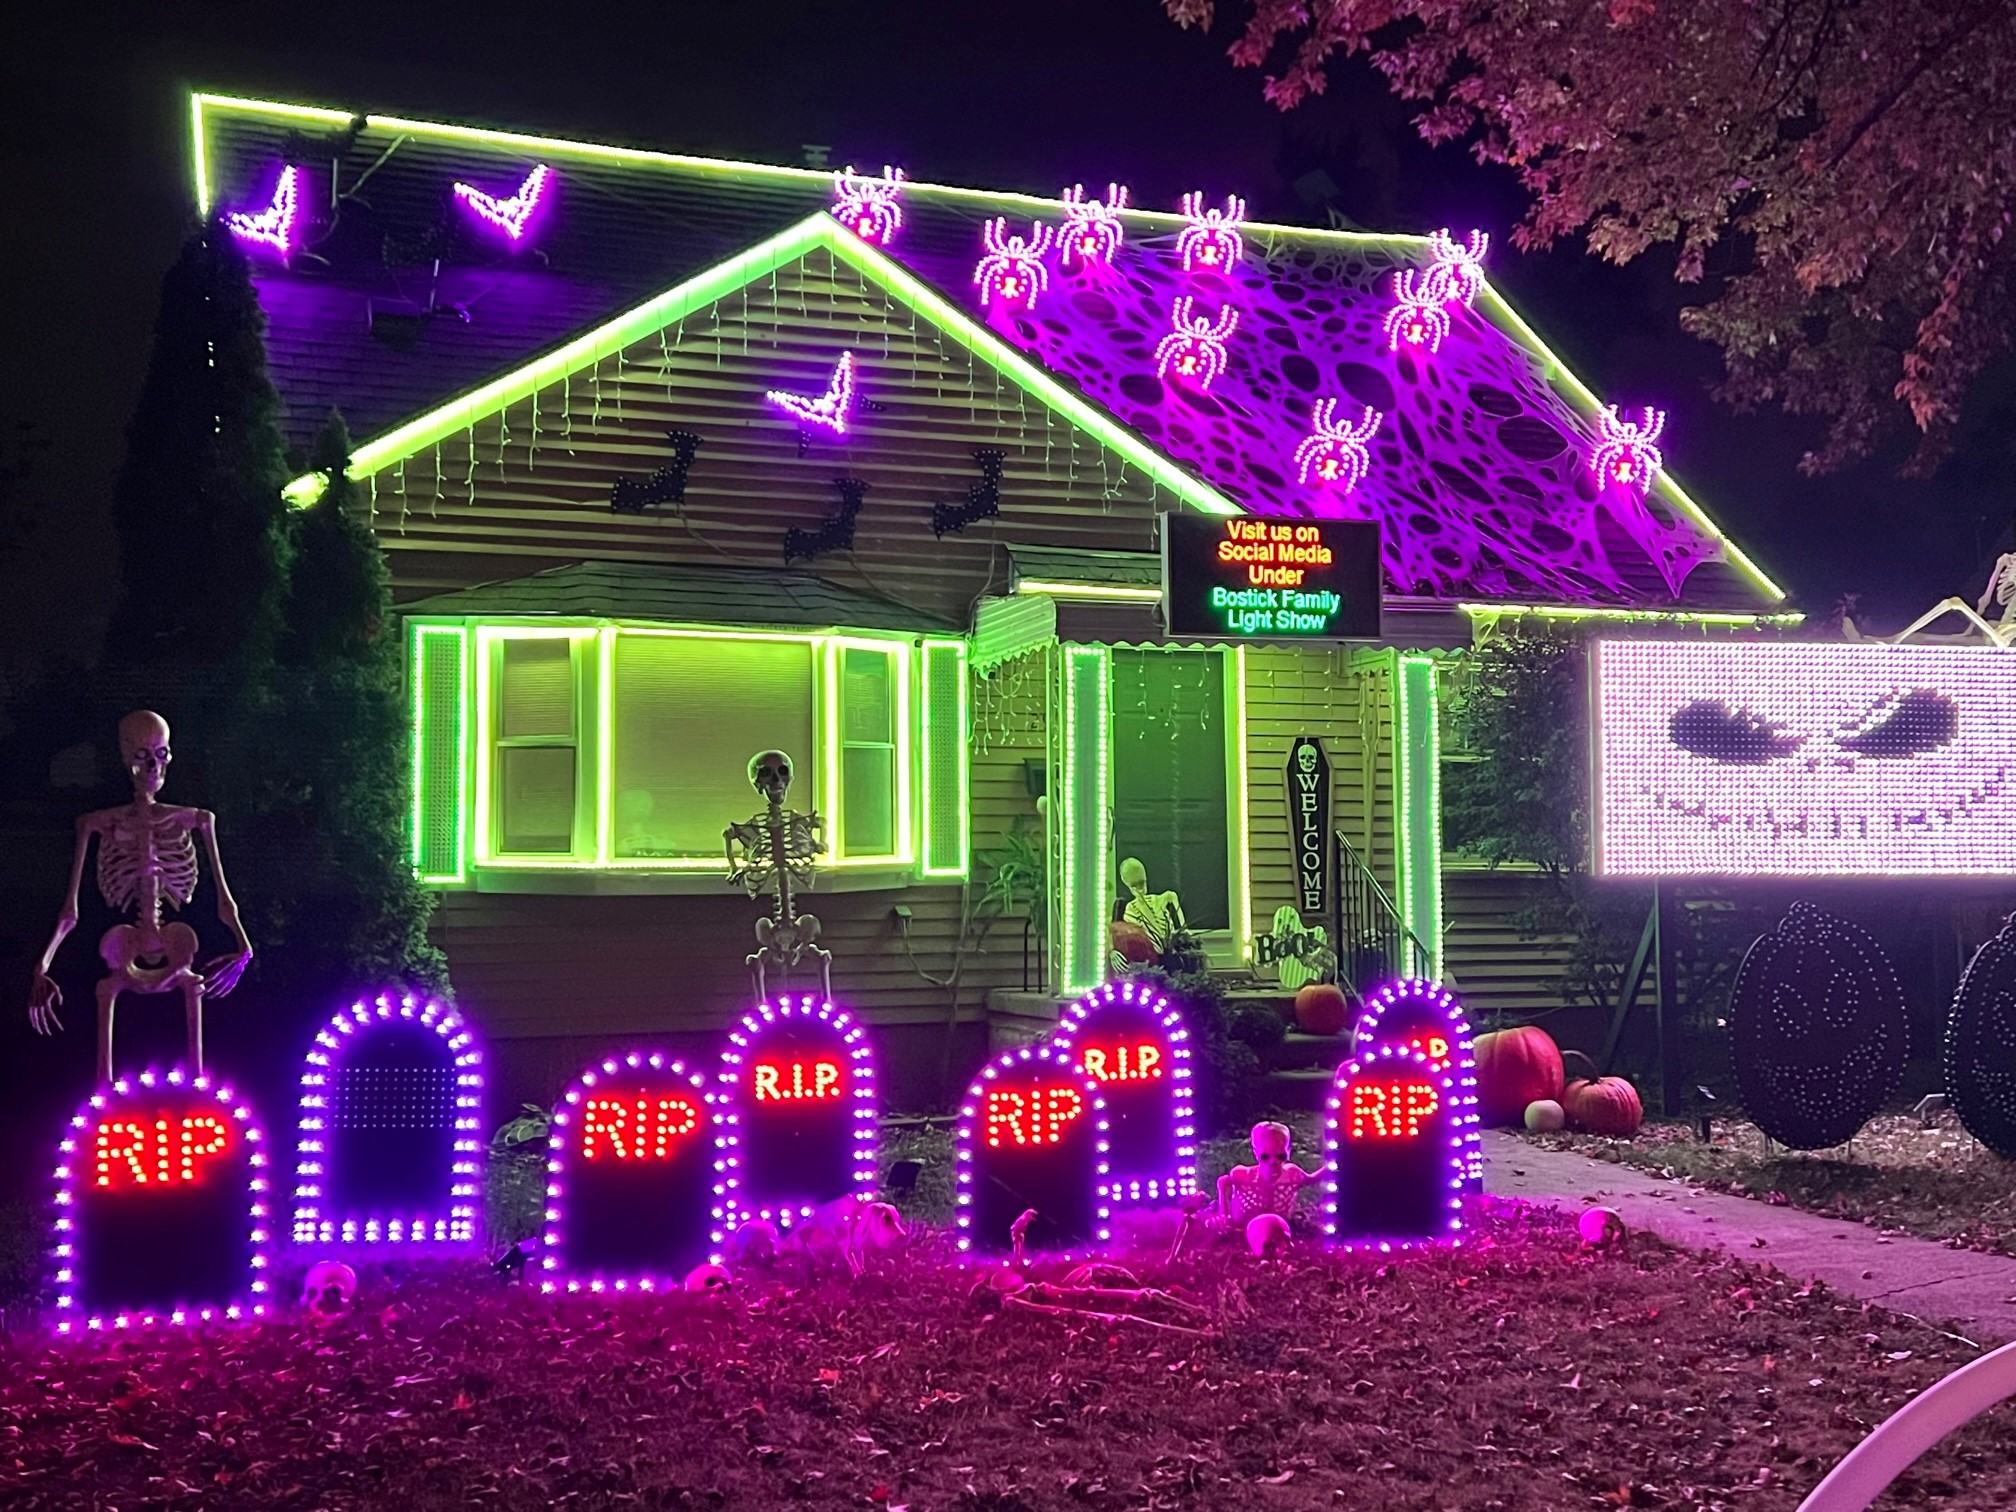 Insane Halloween house lights up in time to Macklemore's 'Downtown' (VIDEO)